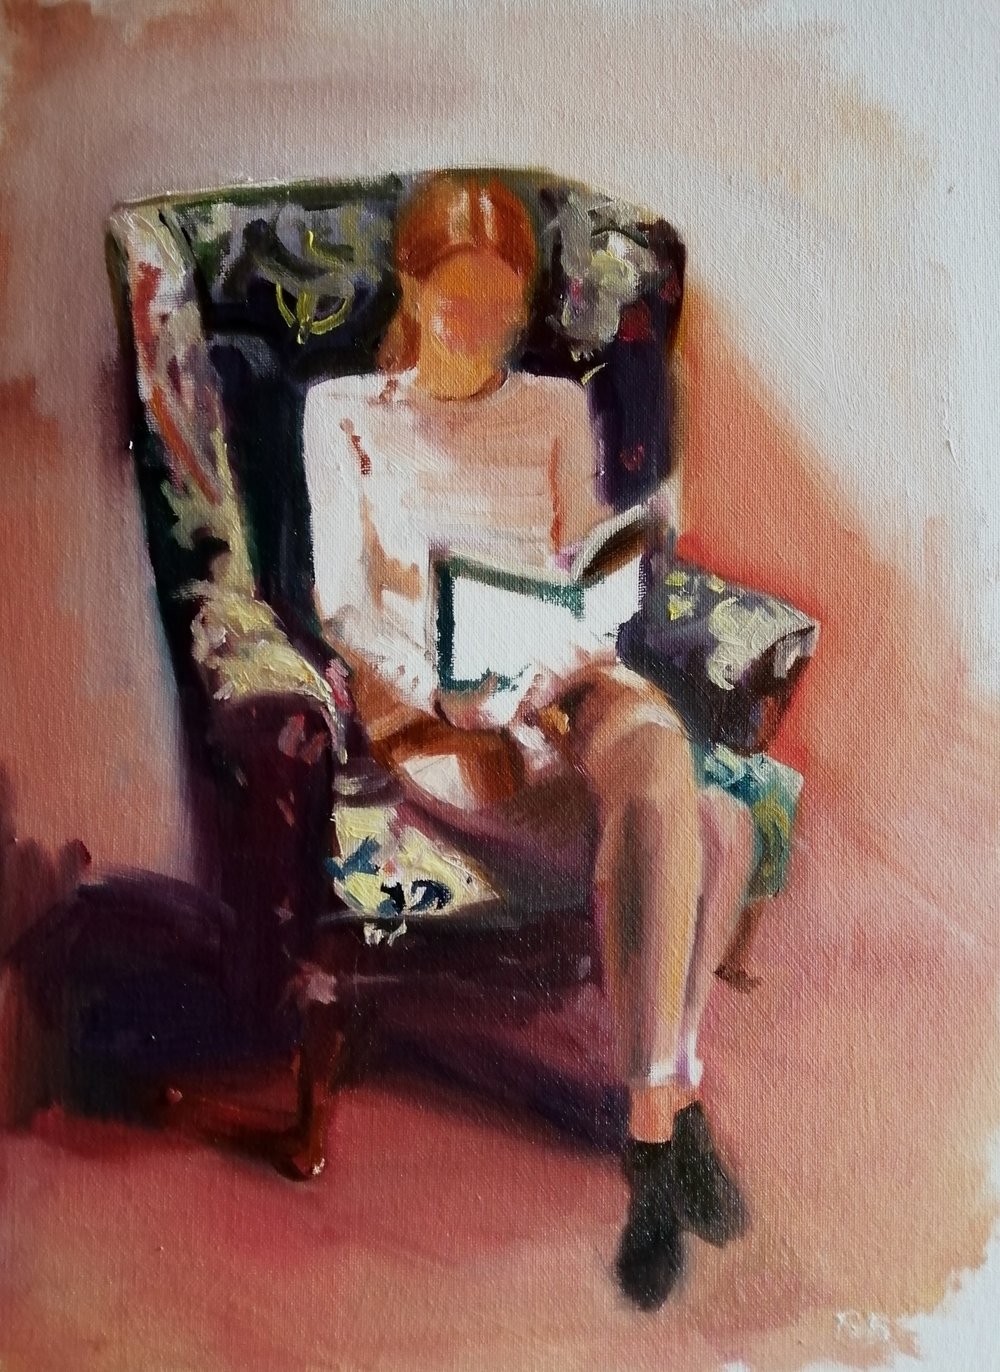  Paperback  Oil on board  28x36cm  SOLD  An impressionist painting of a girl reading a paperback book. Lighting plays an integral part in this piece, forming an impression of lamp light on a cold winter evening.   